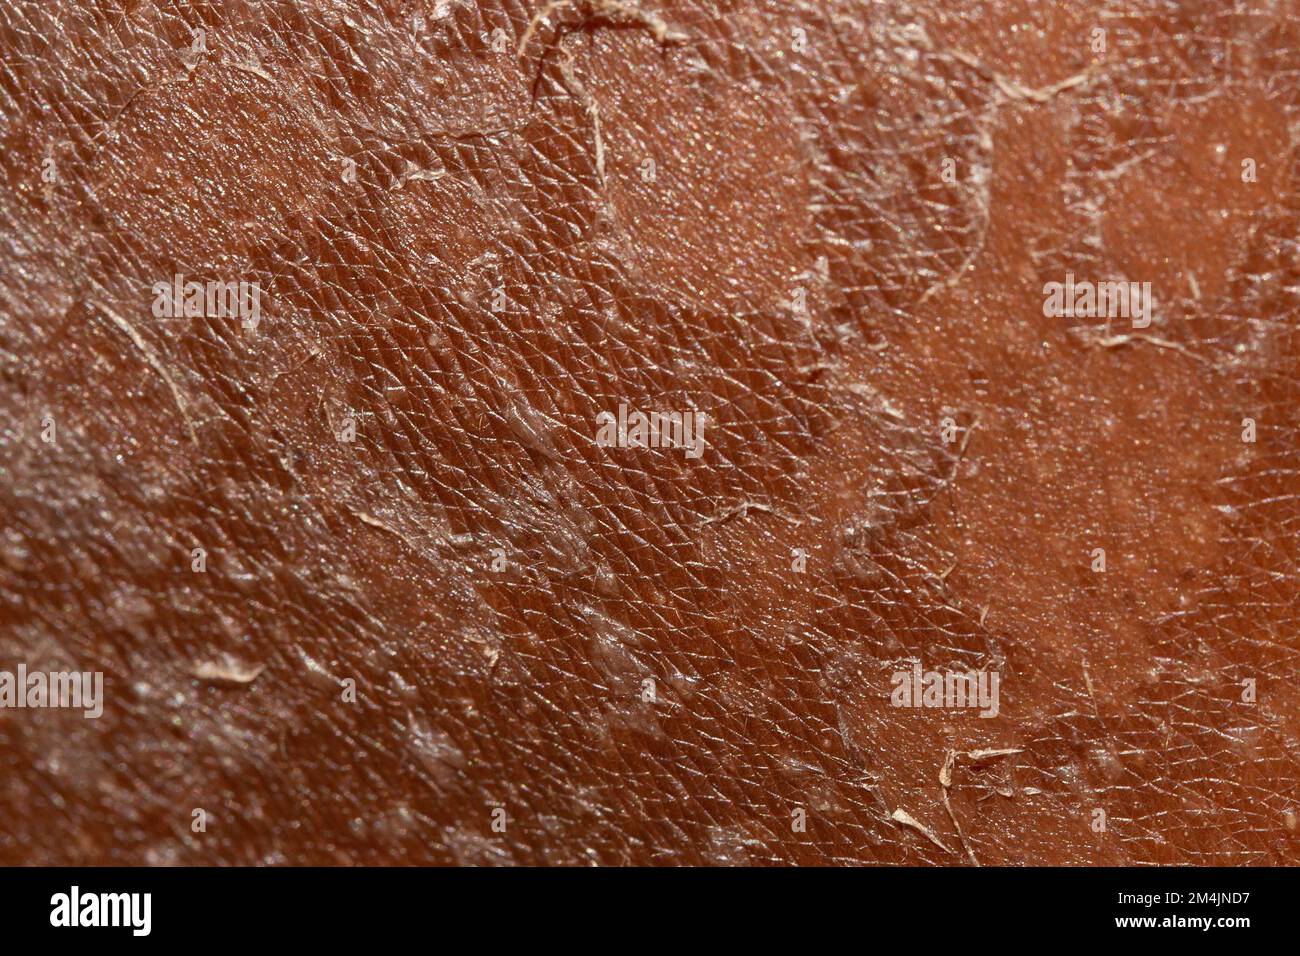 Details of skin that is peeling from sunburn Stock Photo